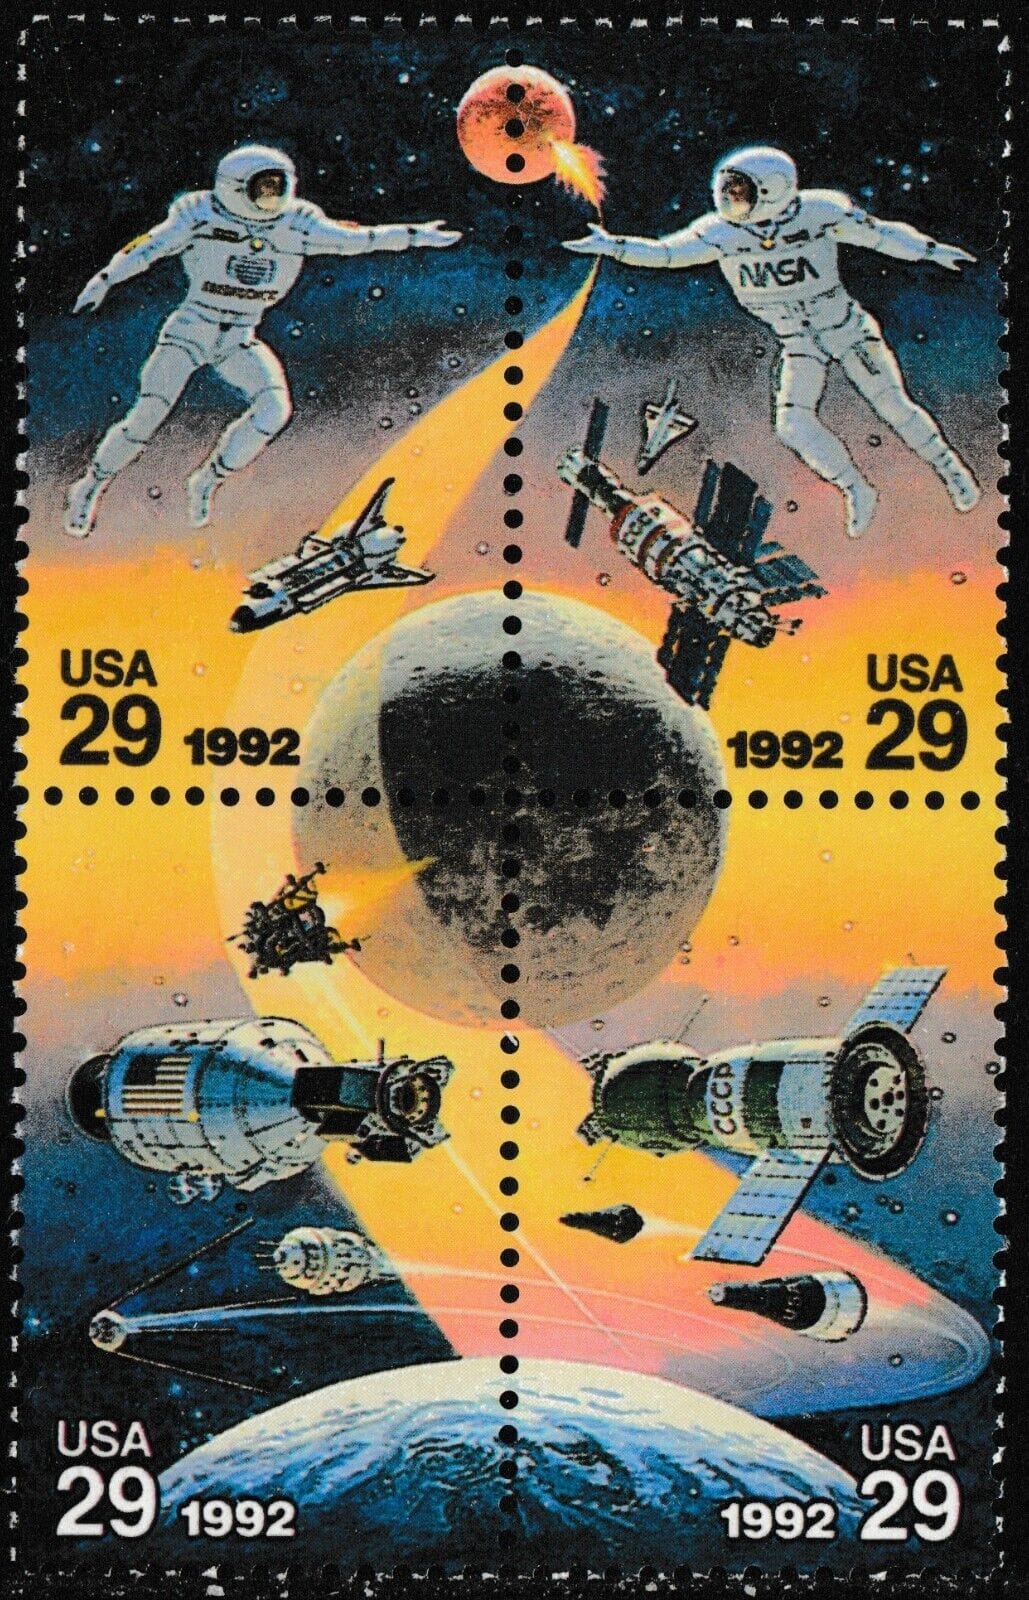 1992 USA space collaboration